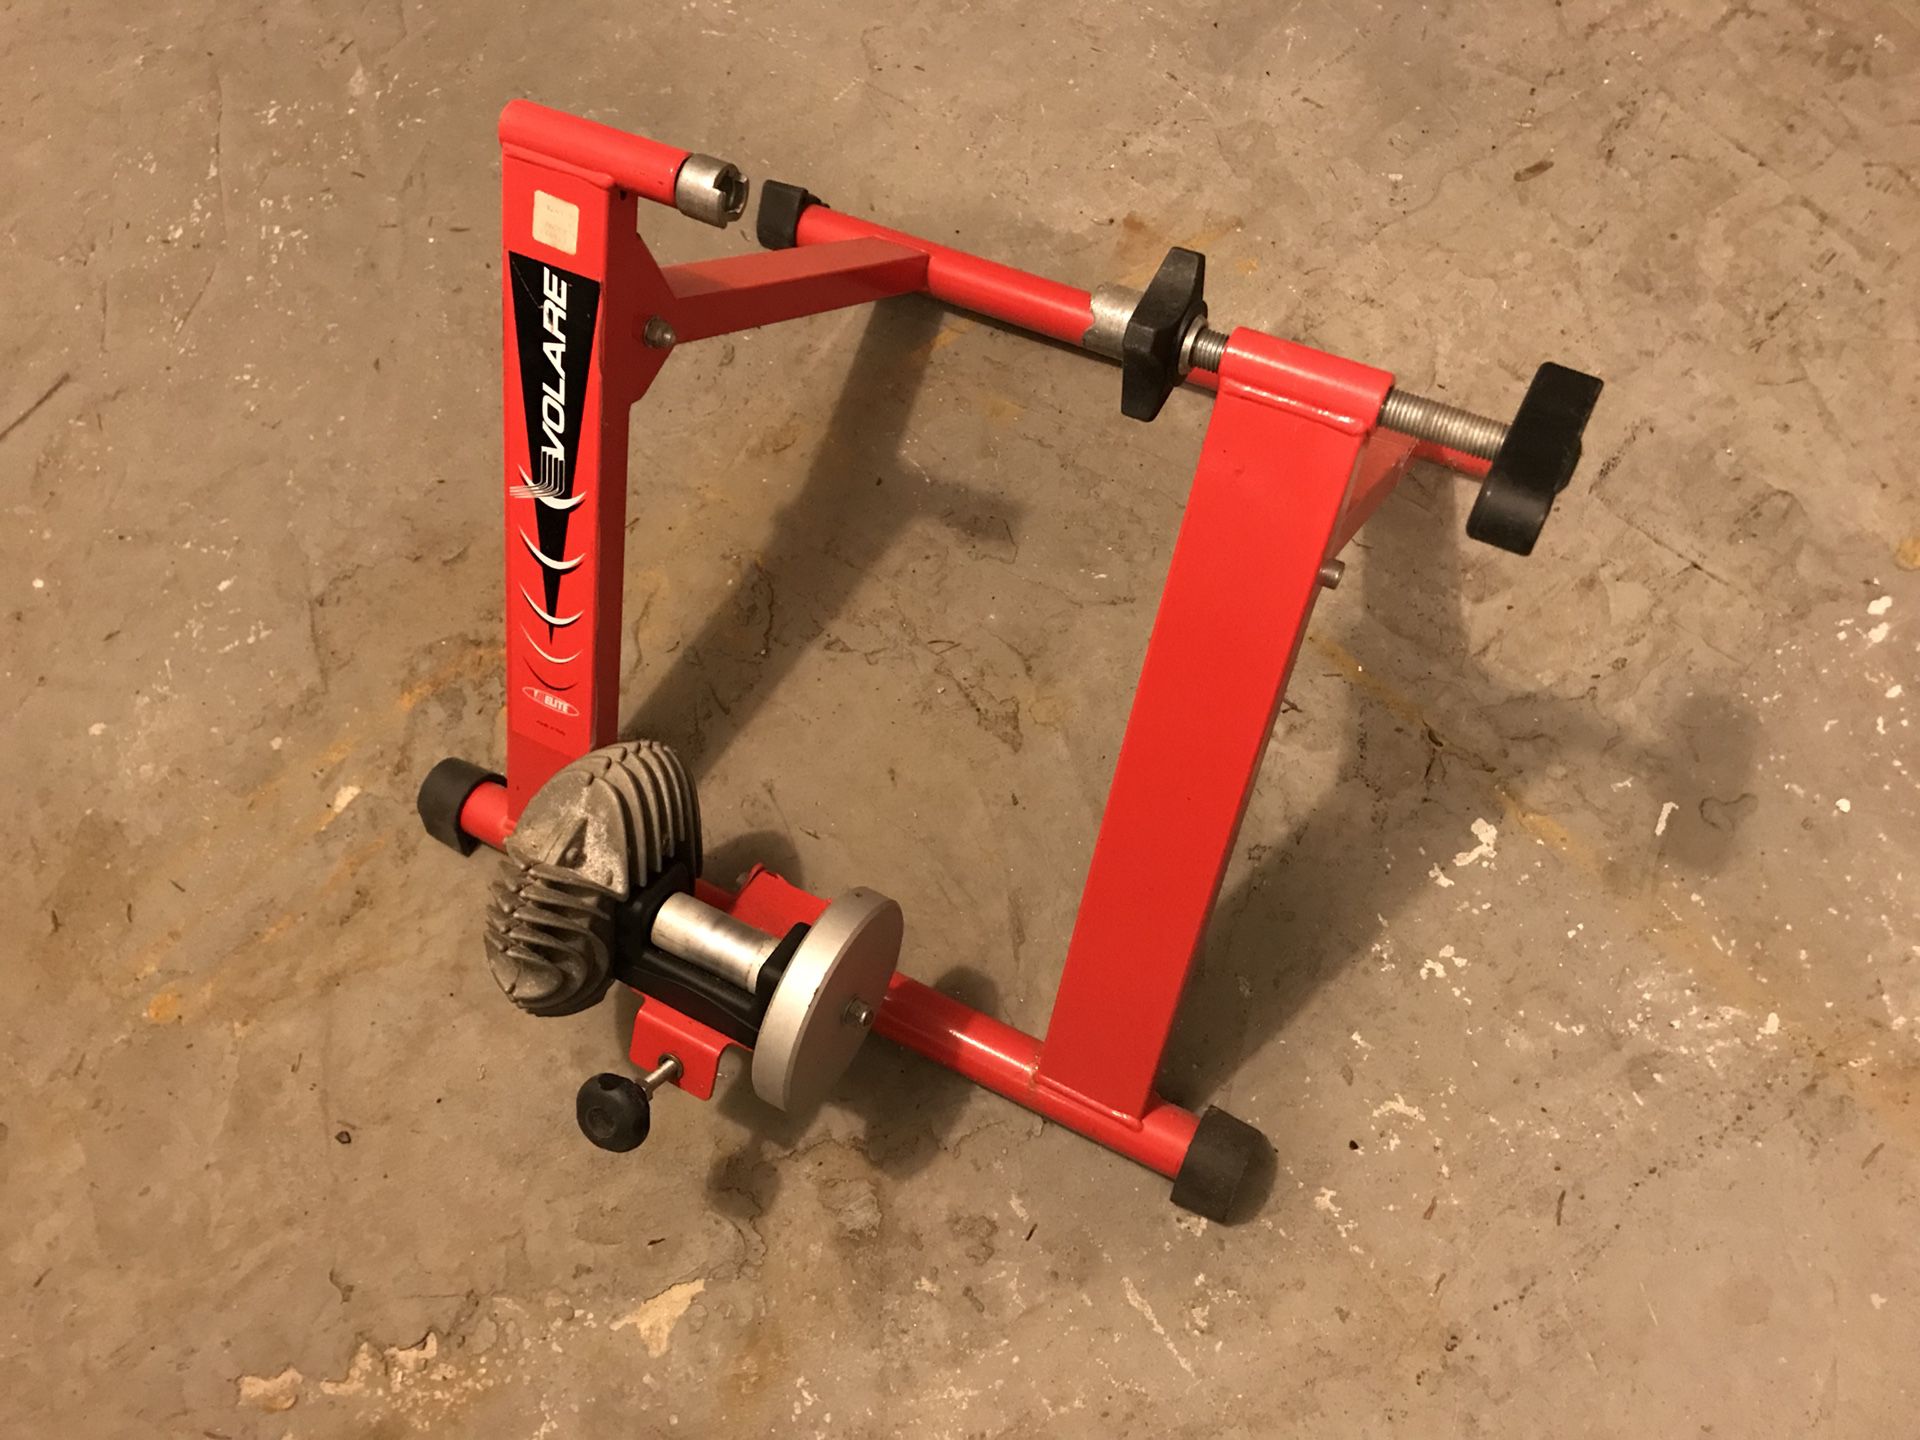 Volare Cycleops Riser Climbing Front Wheel Block for Sale in Newton, MA - OfferUp